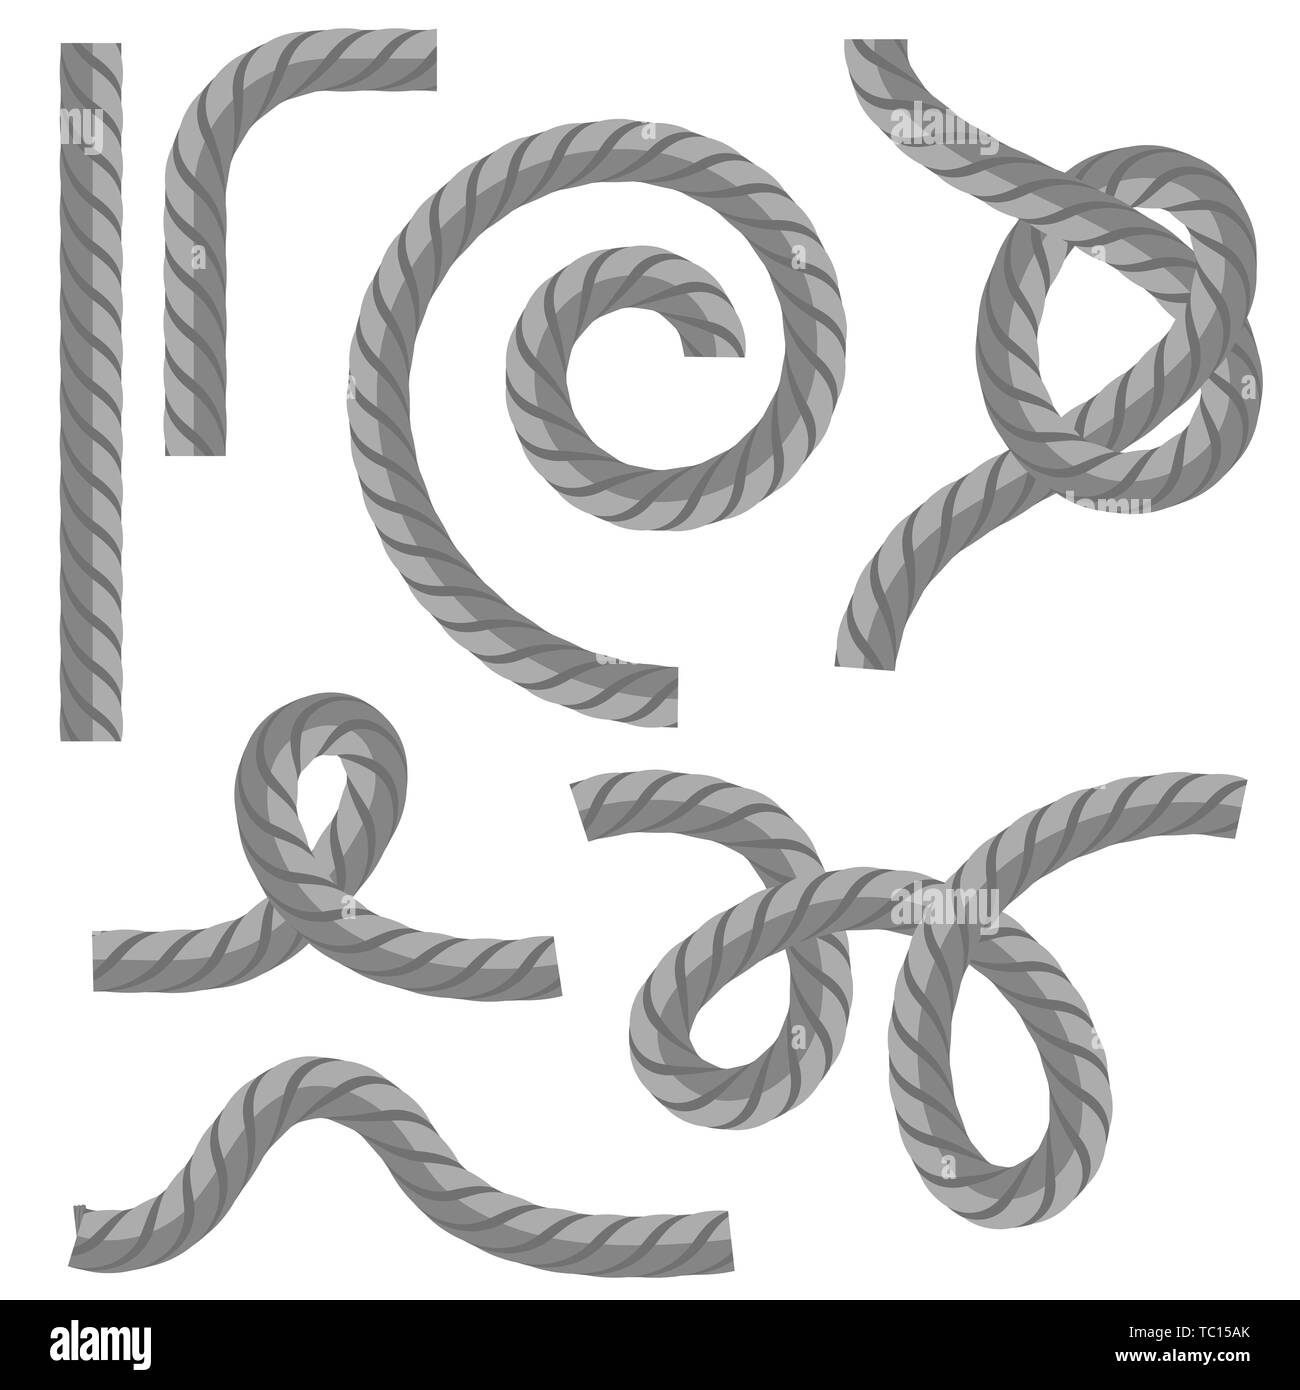 Different Rope Set with Knot on White Background. Stock Photo